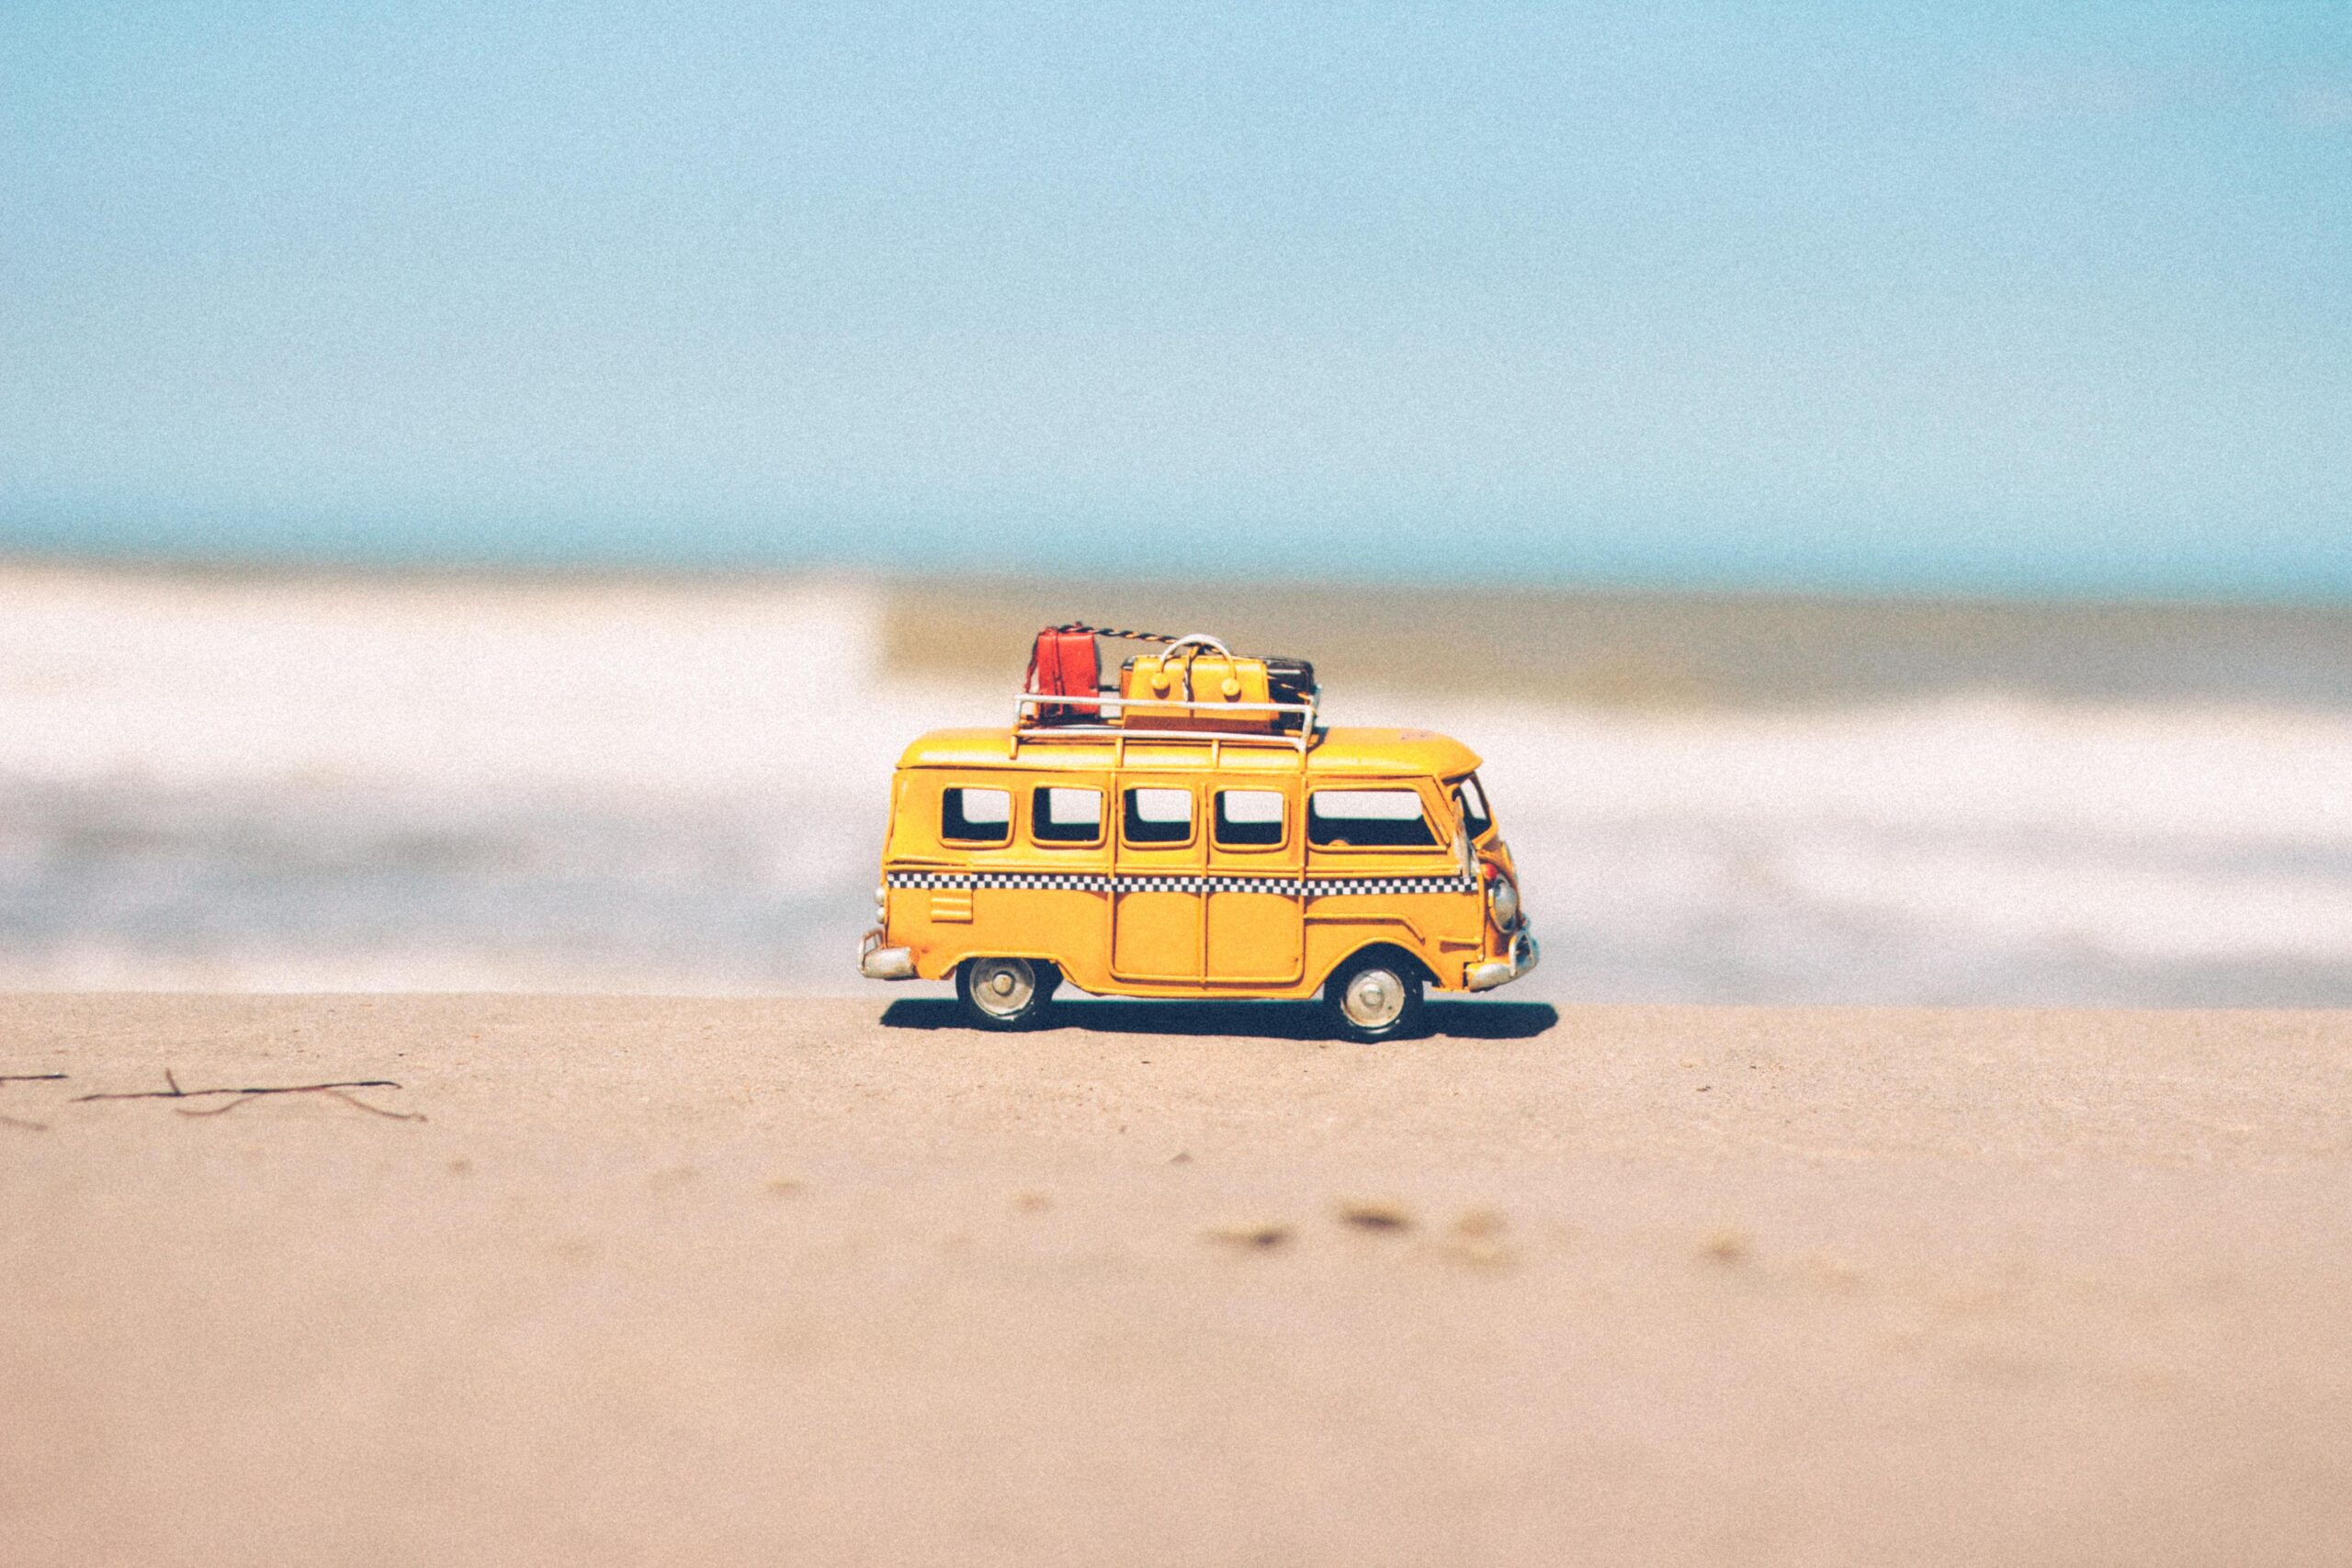 A small yellow bus with luggage on top to show that someone is moving locations. This is for an article about how to research your new home's location